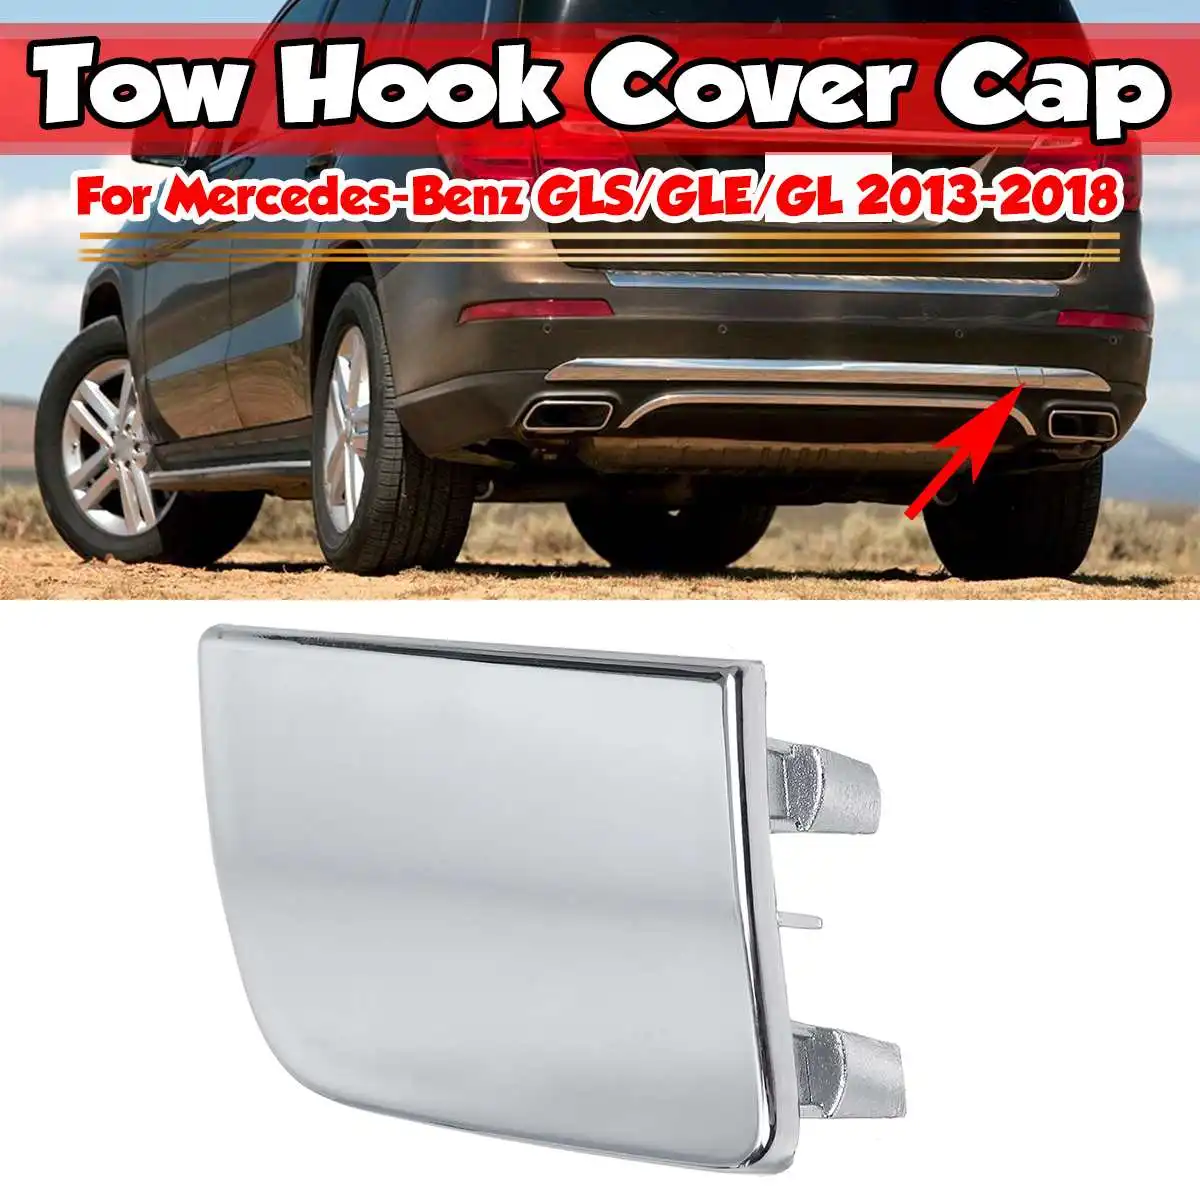 

Car Rear Bumper Tow Hook Cover Cap New Chrome Silver For Mercedes For Benz GLS GLE GL 2013-2018 1668852323